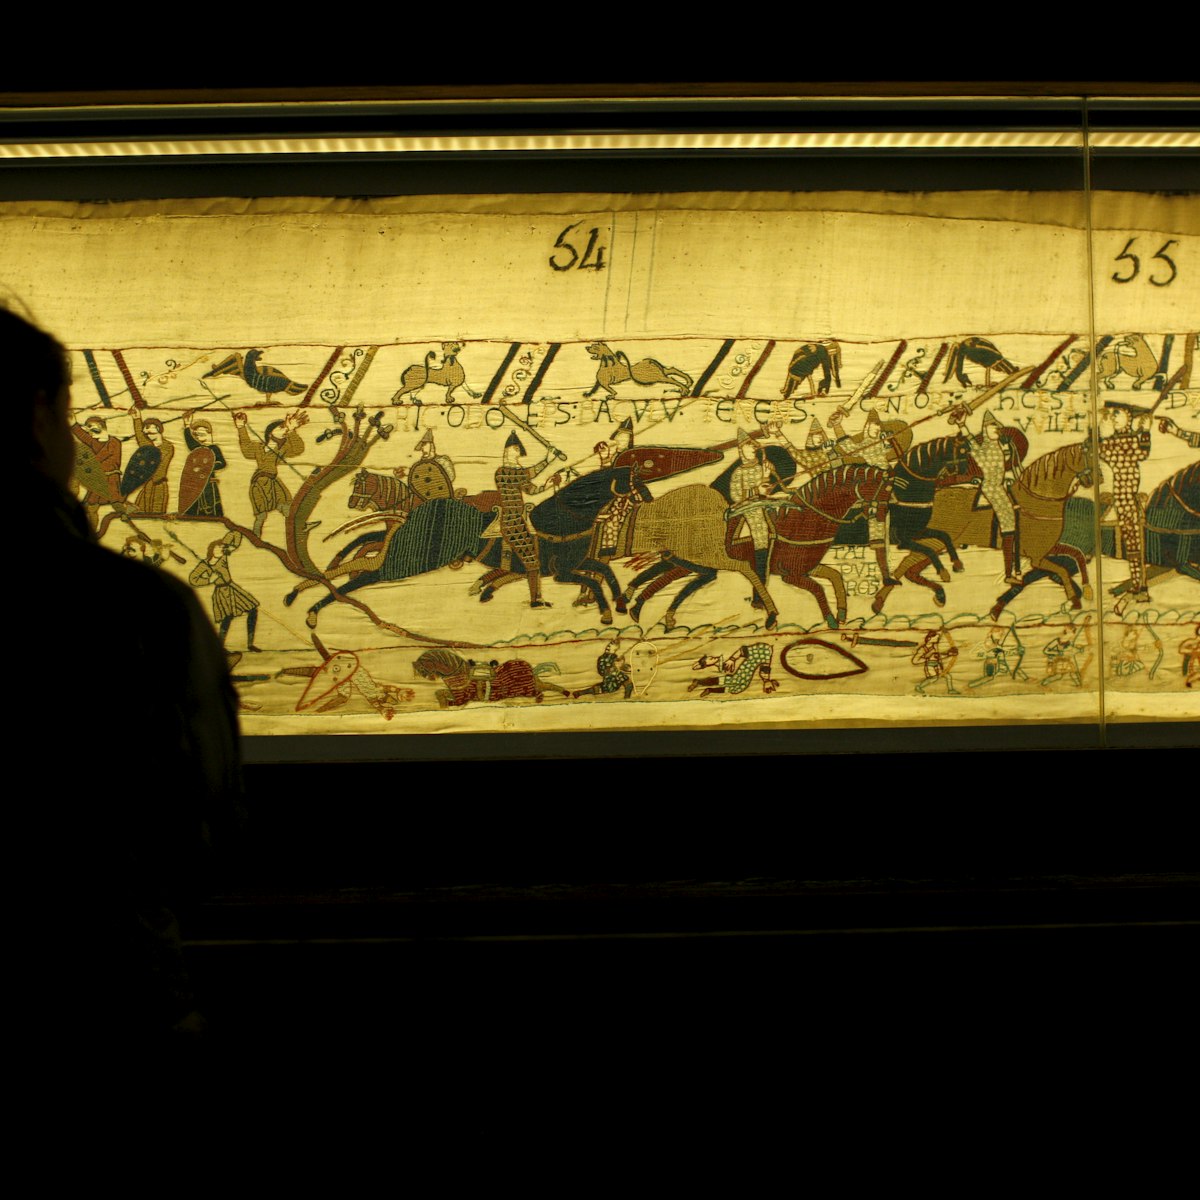 Bayeux Tapestry known in France as La Tapisserie de la Reine Mathilde (Tapestry of Queen Mathilda), Bayeux, Normandy, France, Europe